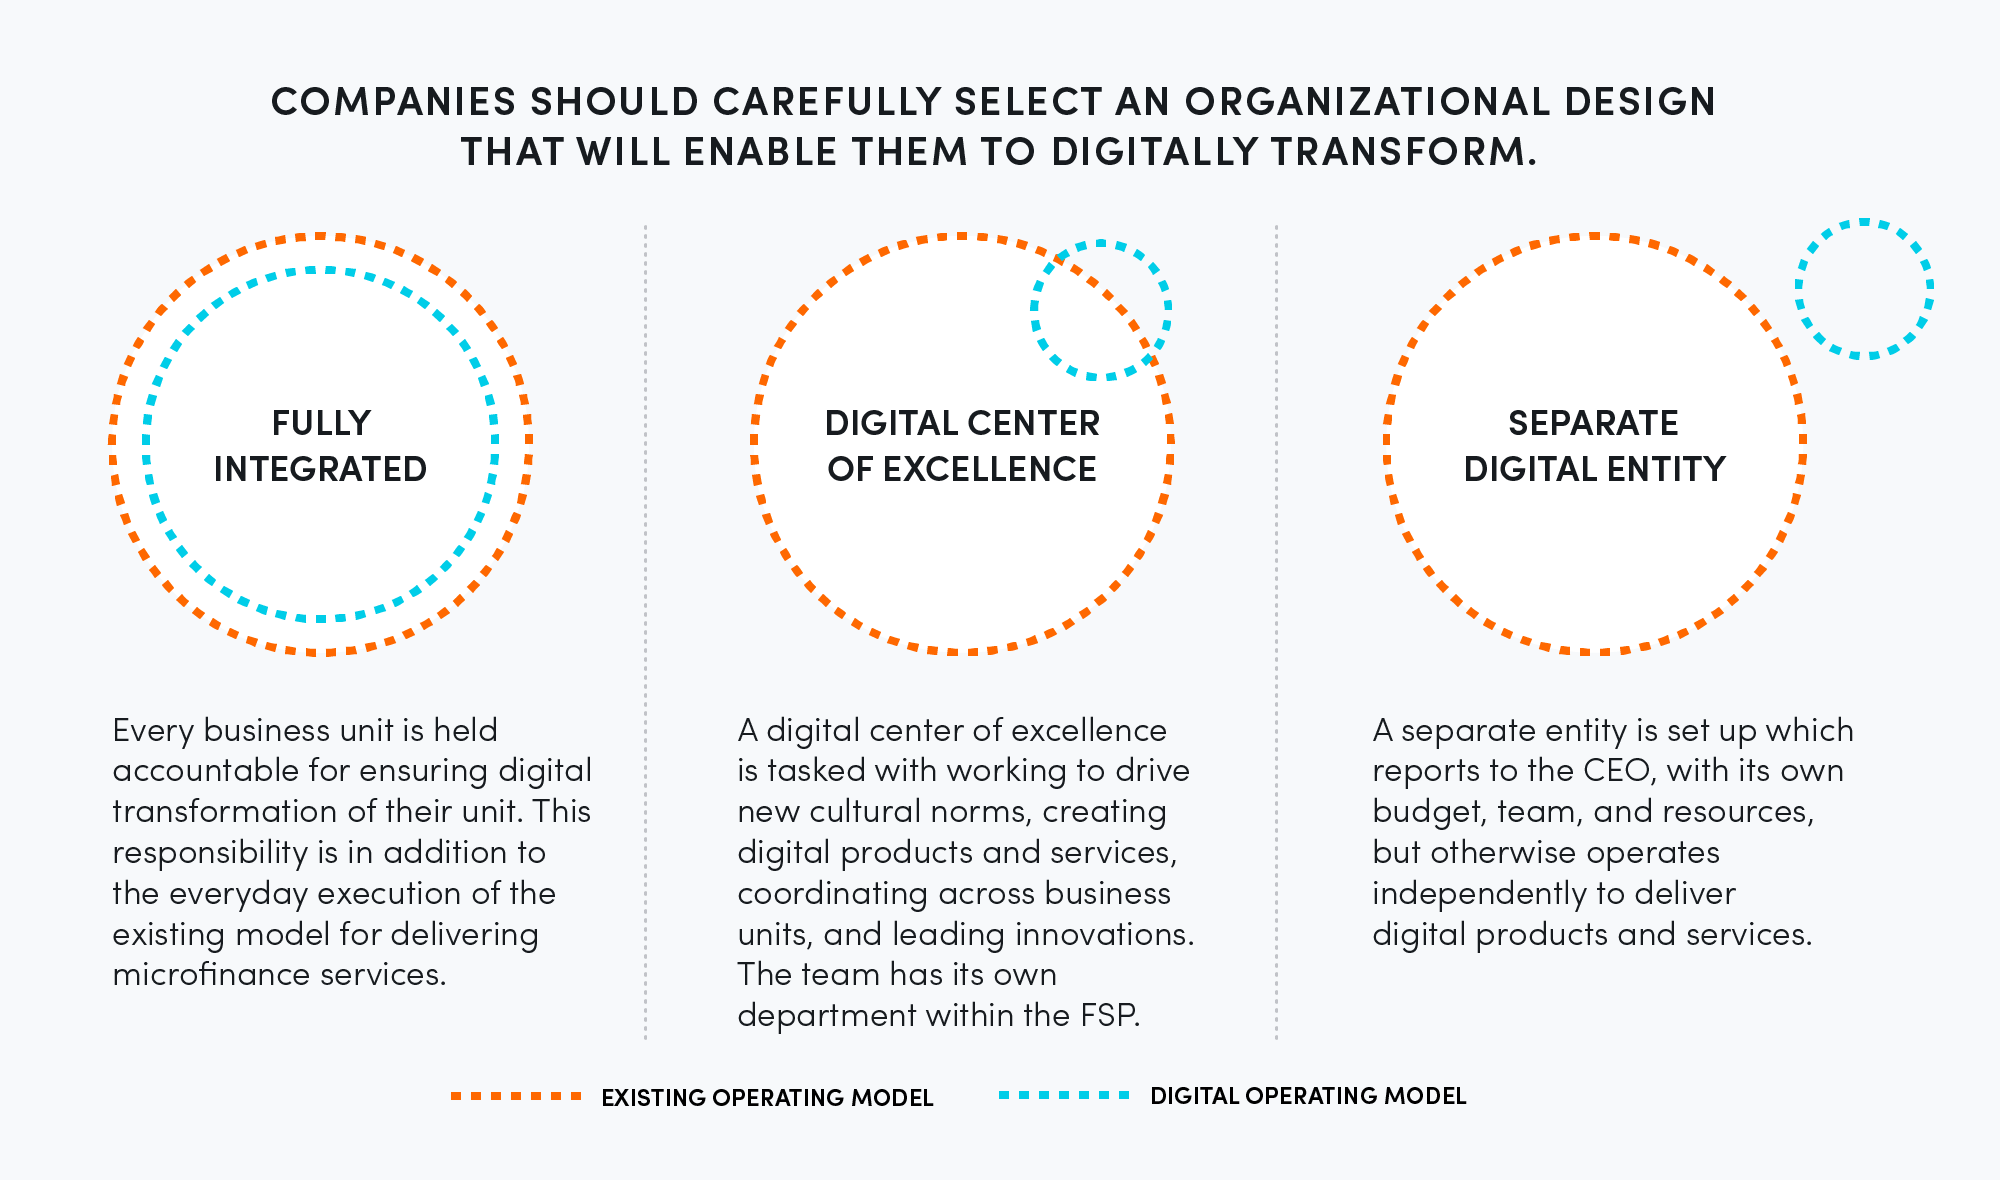 Companies should carefully select an organizational design that will enable them to digitally transform. 